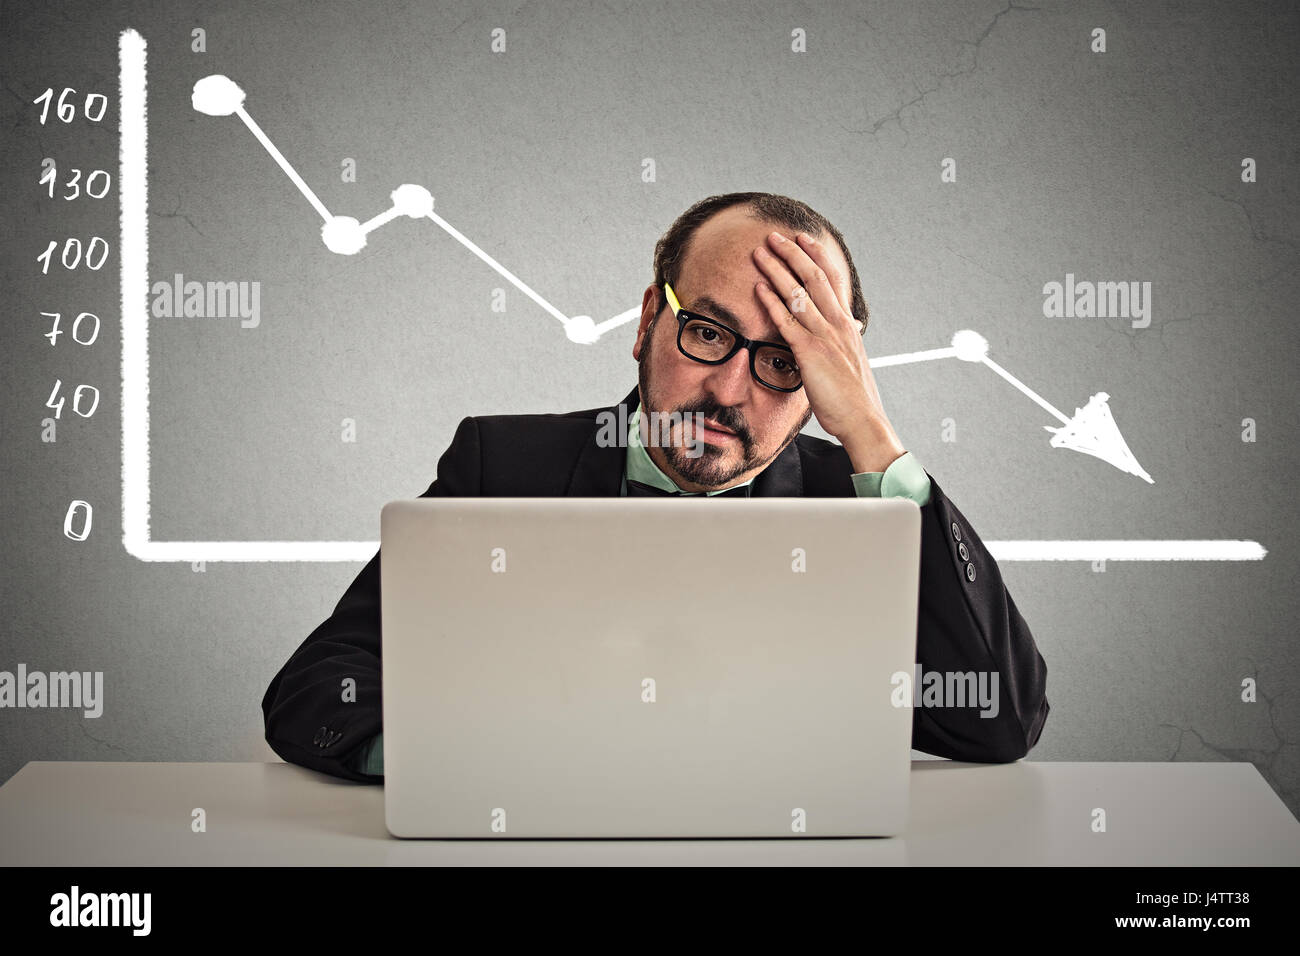 Frustrated stressed business man sitting at table in front of computer with financial market chart graphic going down on grey office wall background.  Stock Photo